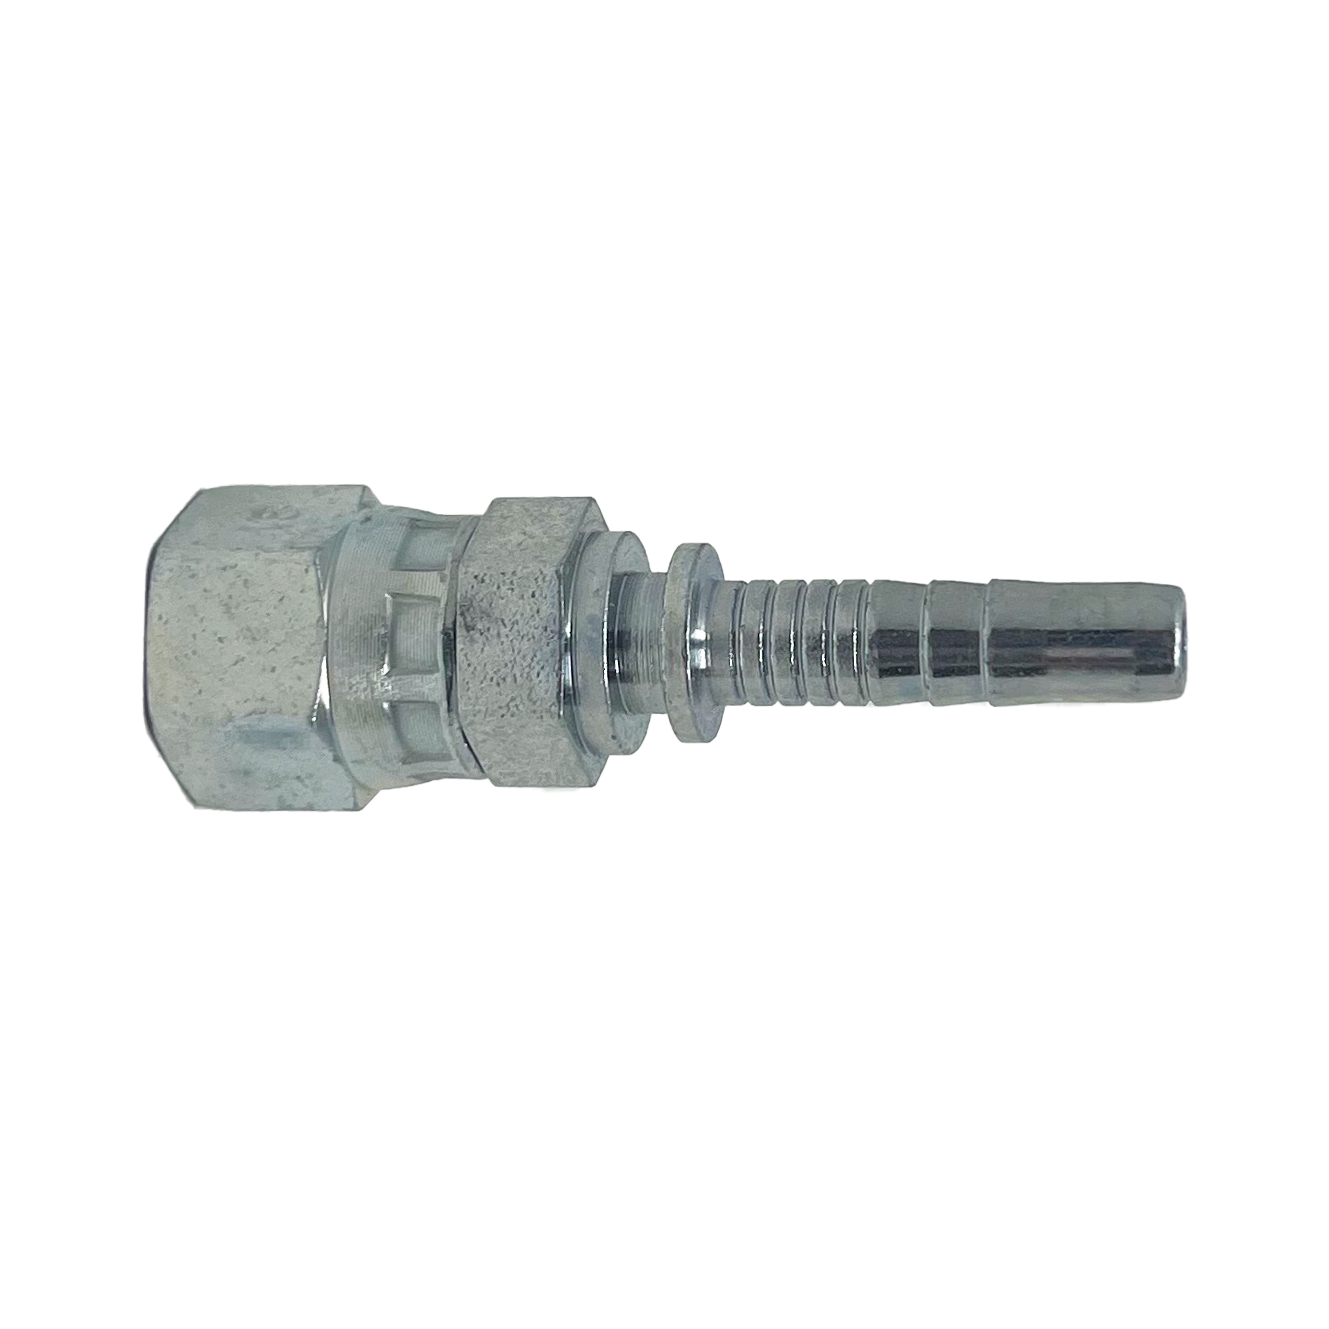 UC-JCFX-0404+UCF9-04S 	: Continental Hose Fitting with Ferrule, 0.25 (1/4") Hose ID, 7/16-20 Female JIC, Straight, Swivel Connection, Stainless